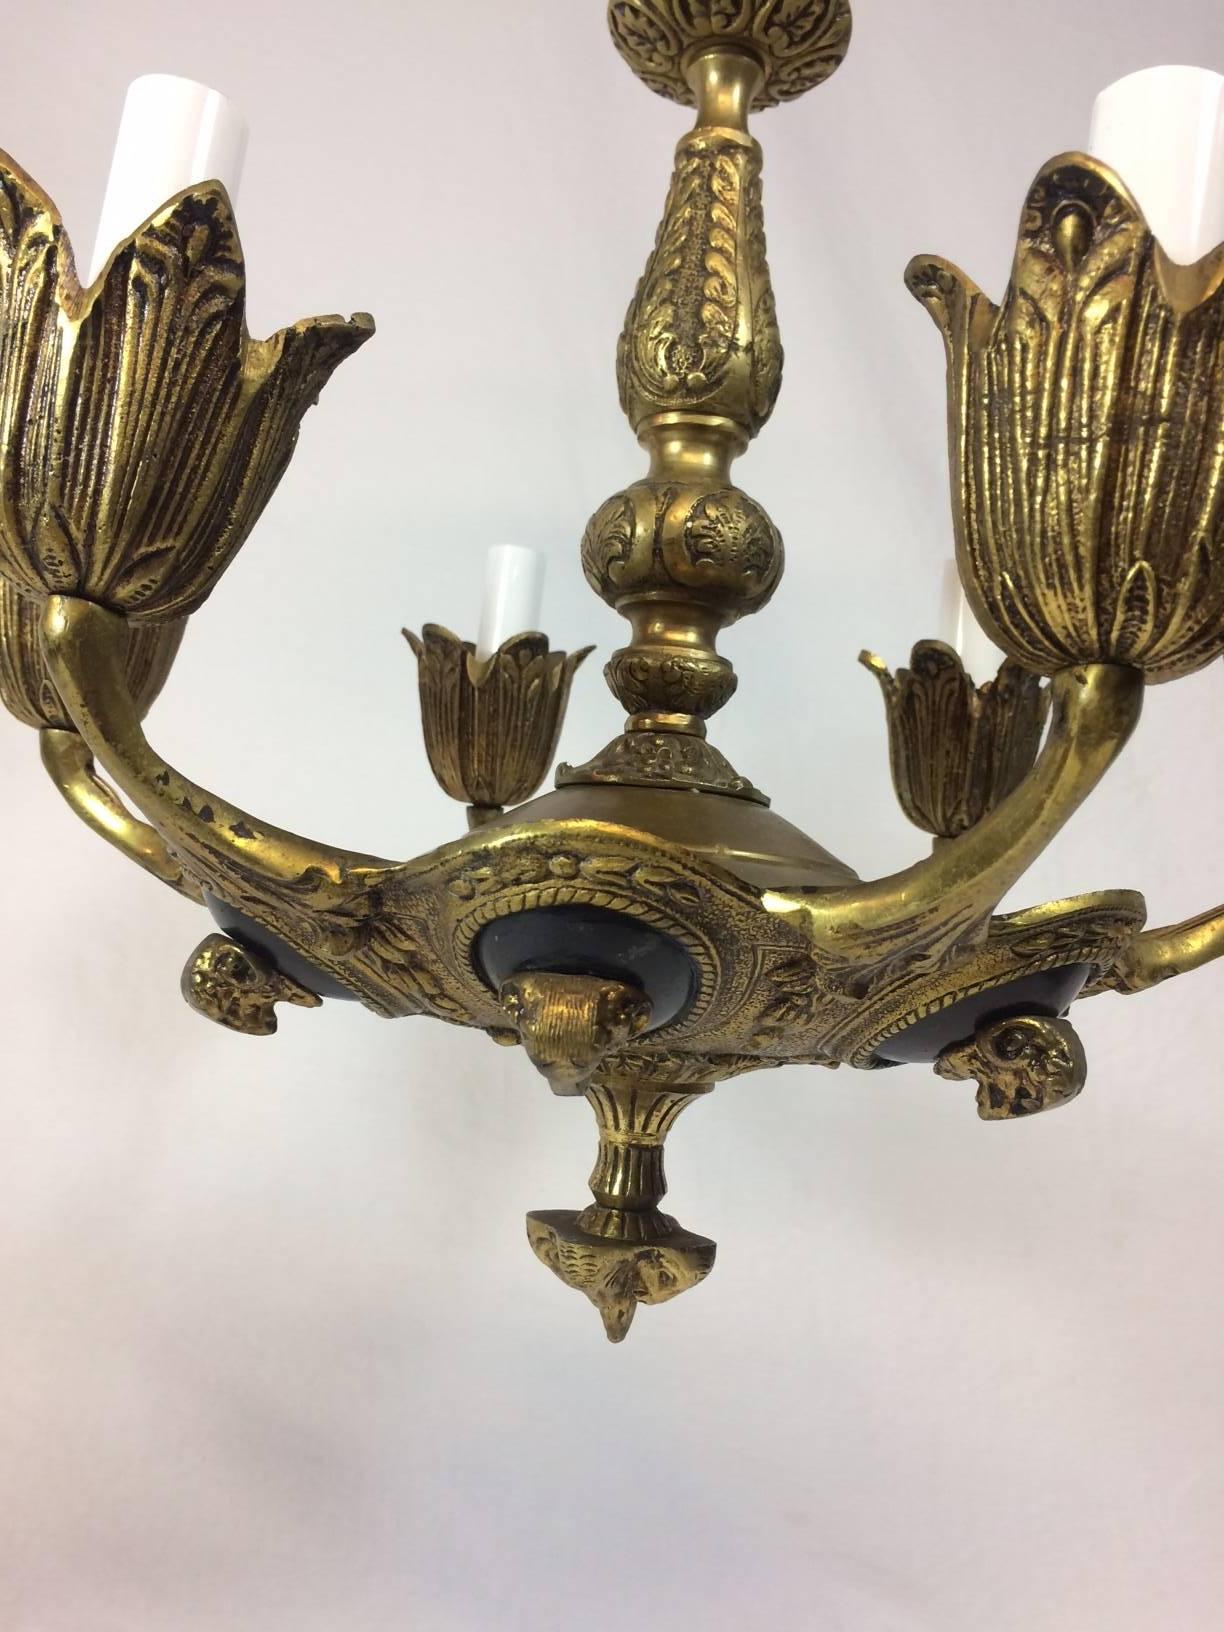 Cast Empire Style Ram's Head Chandelier For Sale